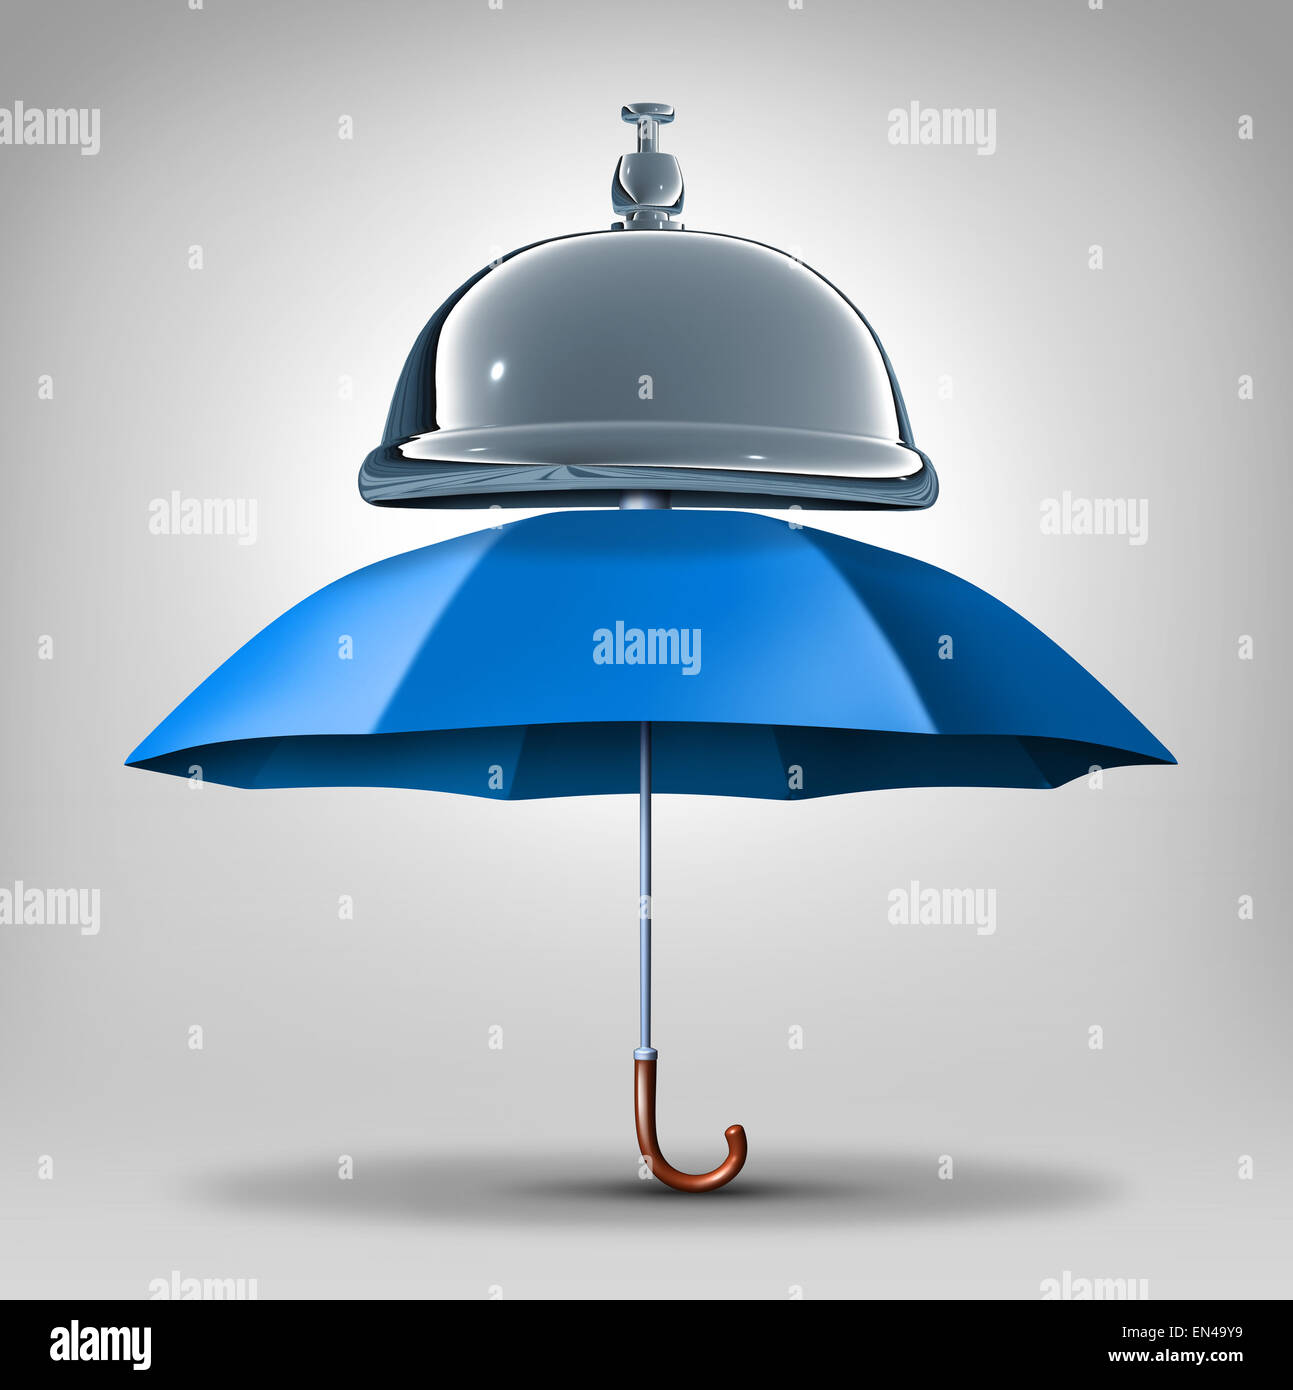 Protection services concept as a blue umbrella with a service bell as a symbol and icon for providing safety and security assistance as health benefits or business guarantees. Stock Photo